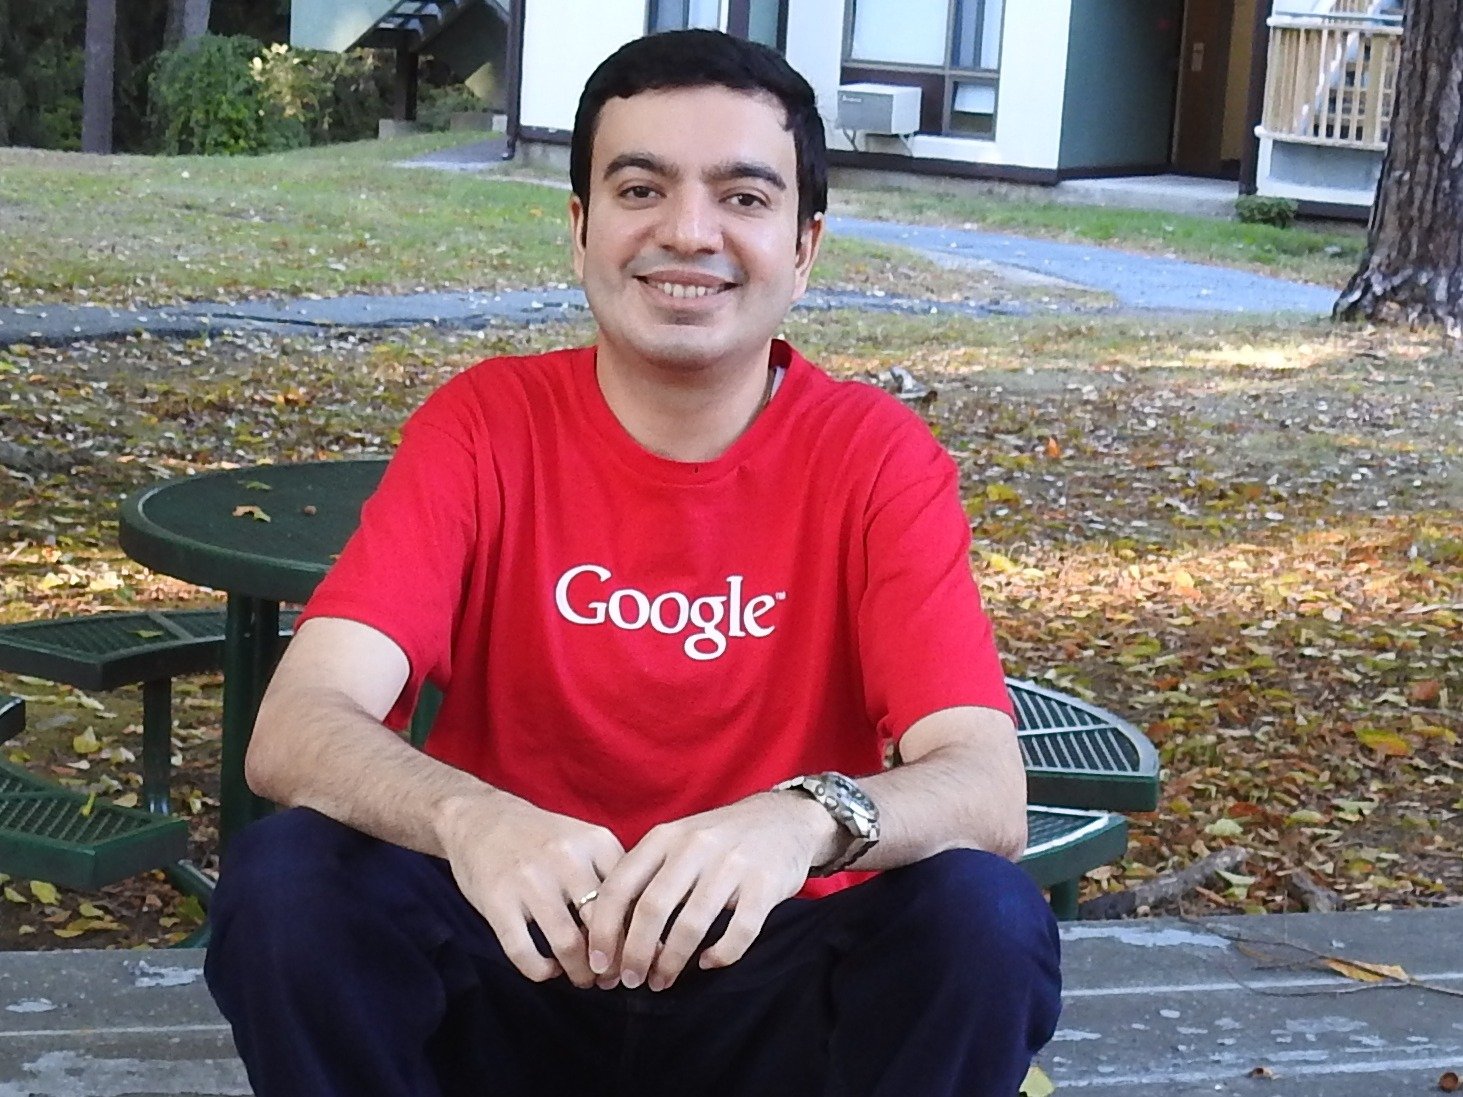 Sanmay Ved who bought Google.com donates Google reward to charity